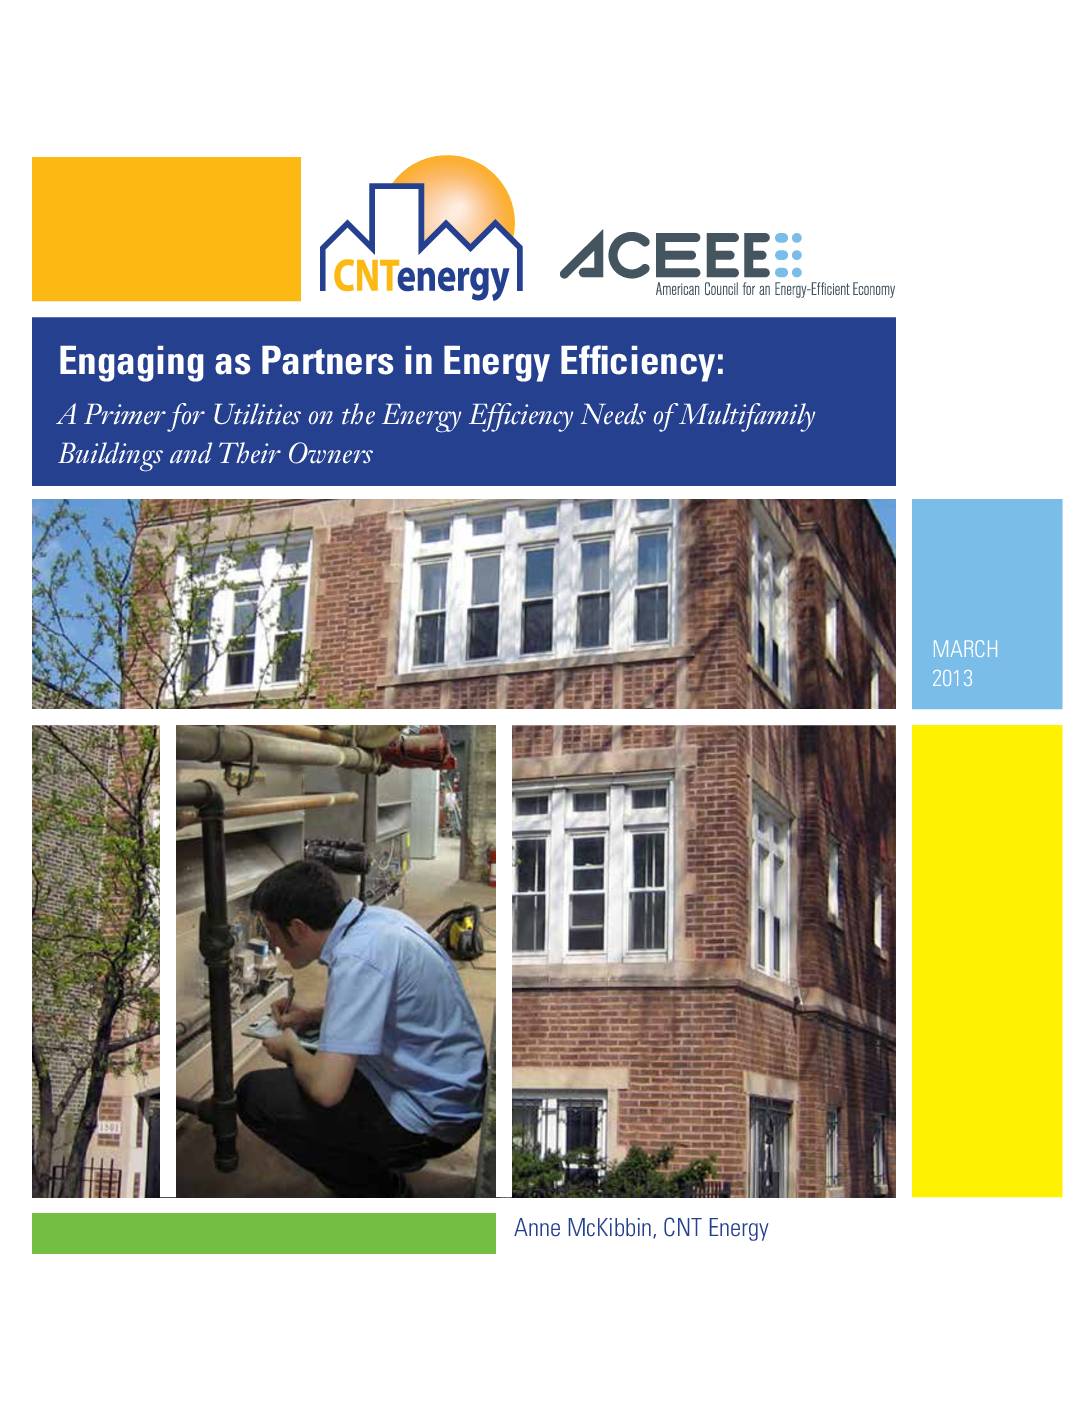 Engaging as Partners: Introducing Utilities to the Energy Efficiency Needs of Multifamily Buildings and Their Owners